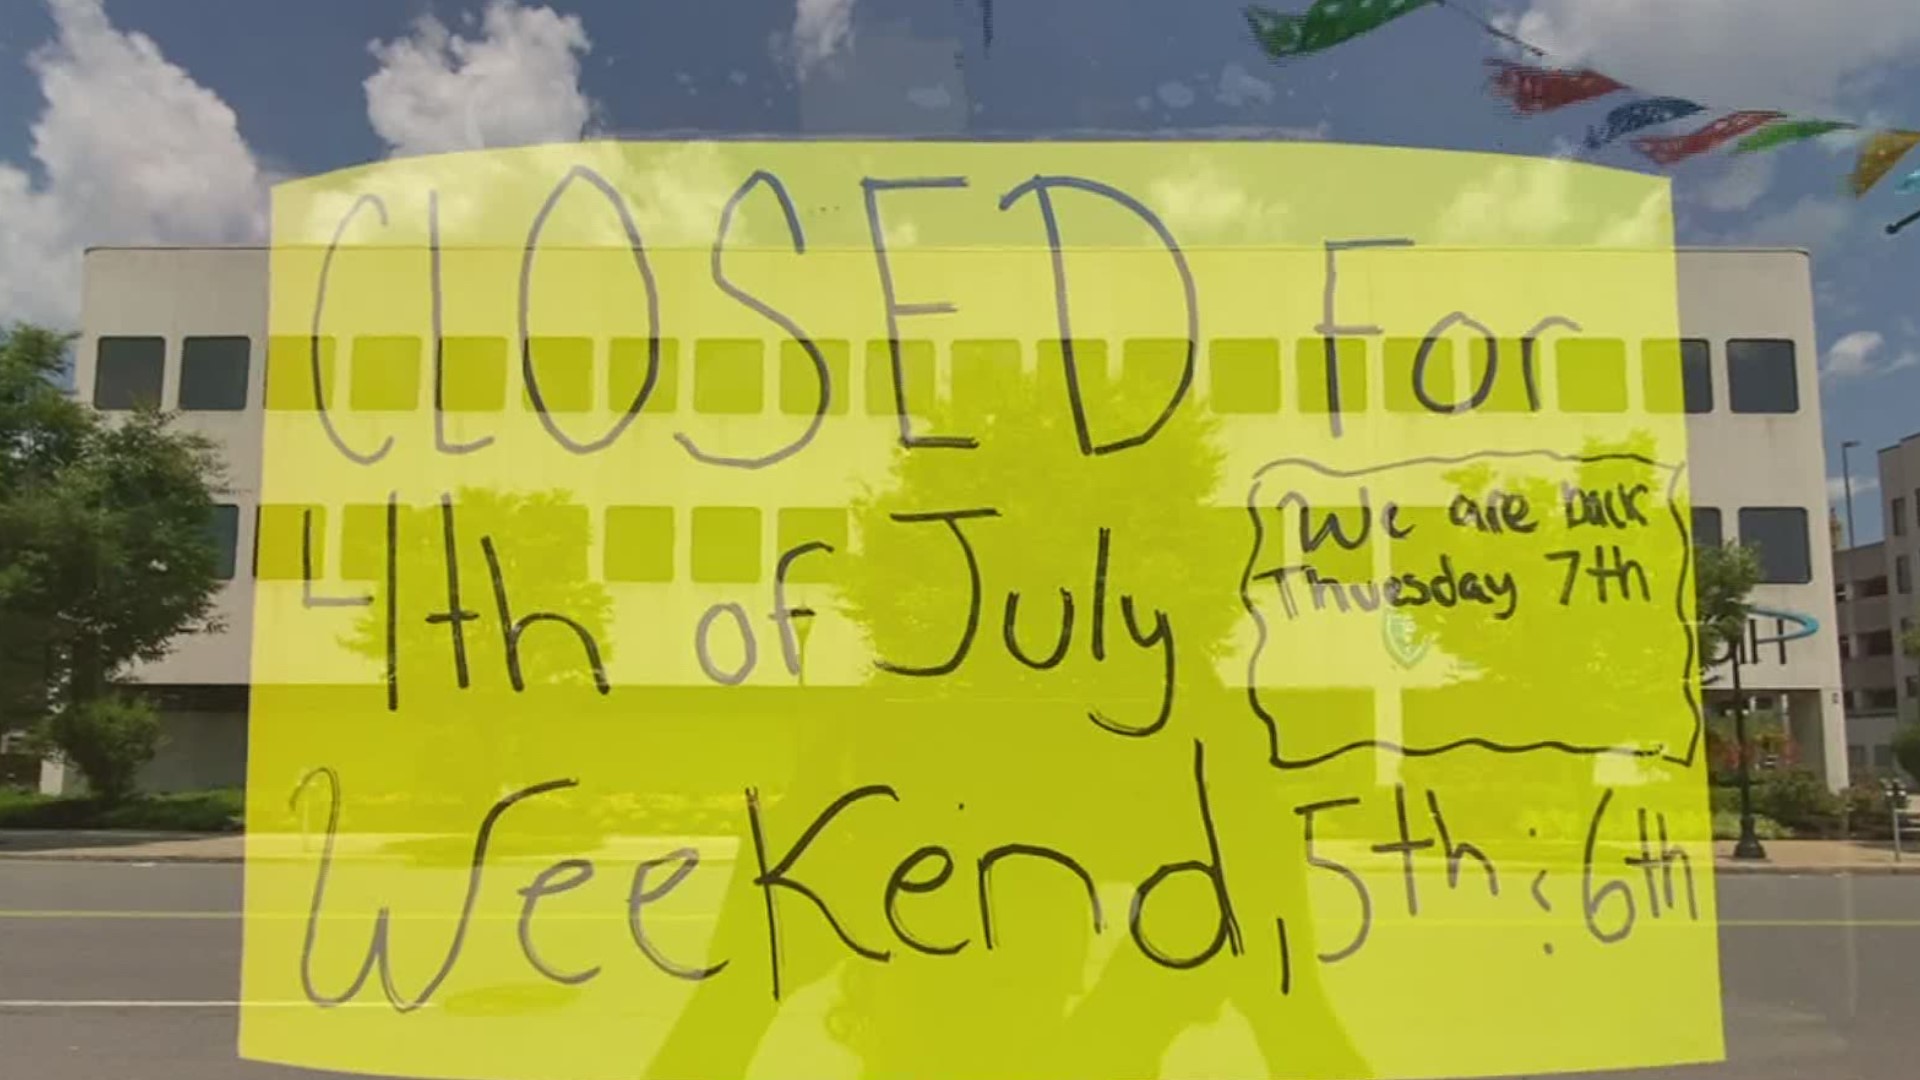 Like many other places, the Fourth of July looks a bit different this year. Many businesses opted to close up shop this holiday weekend.